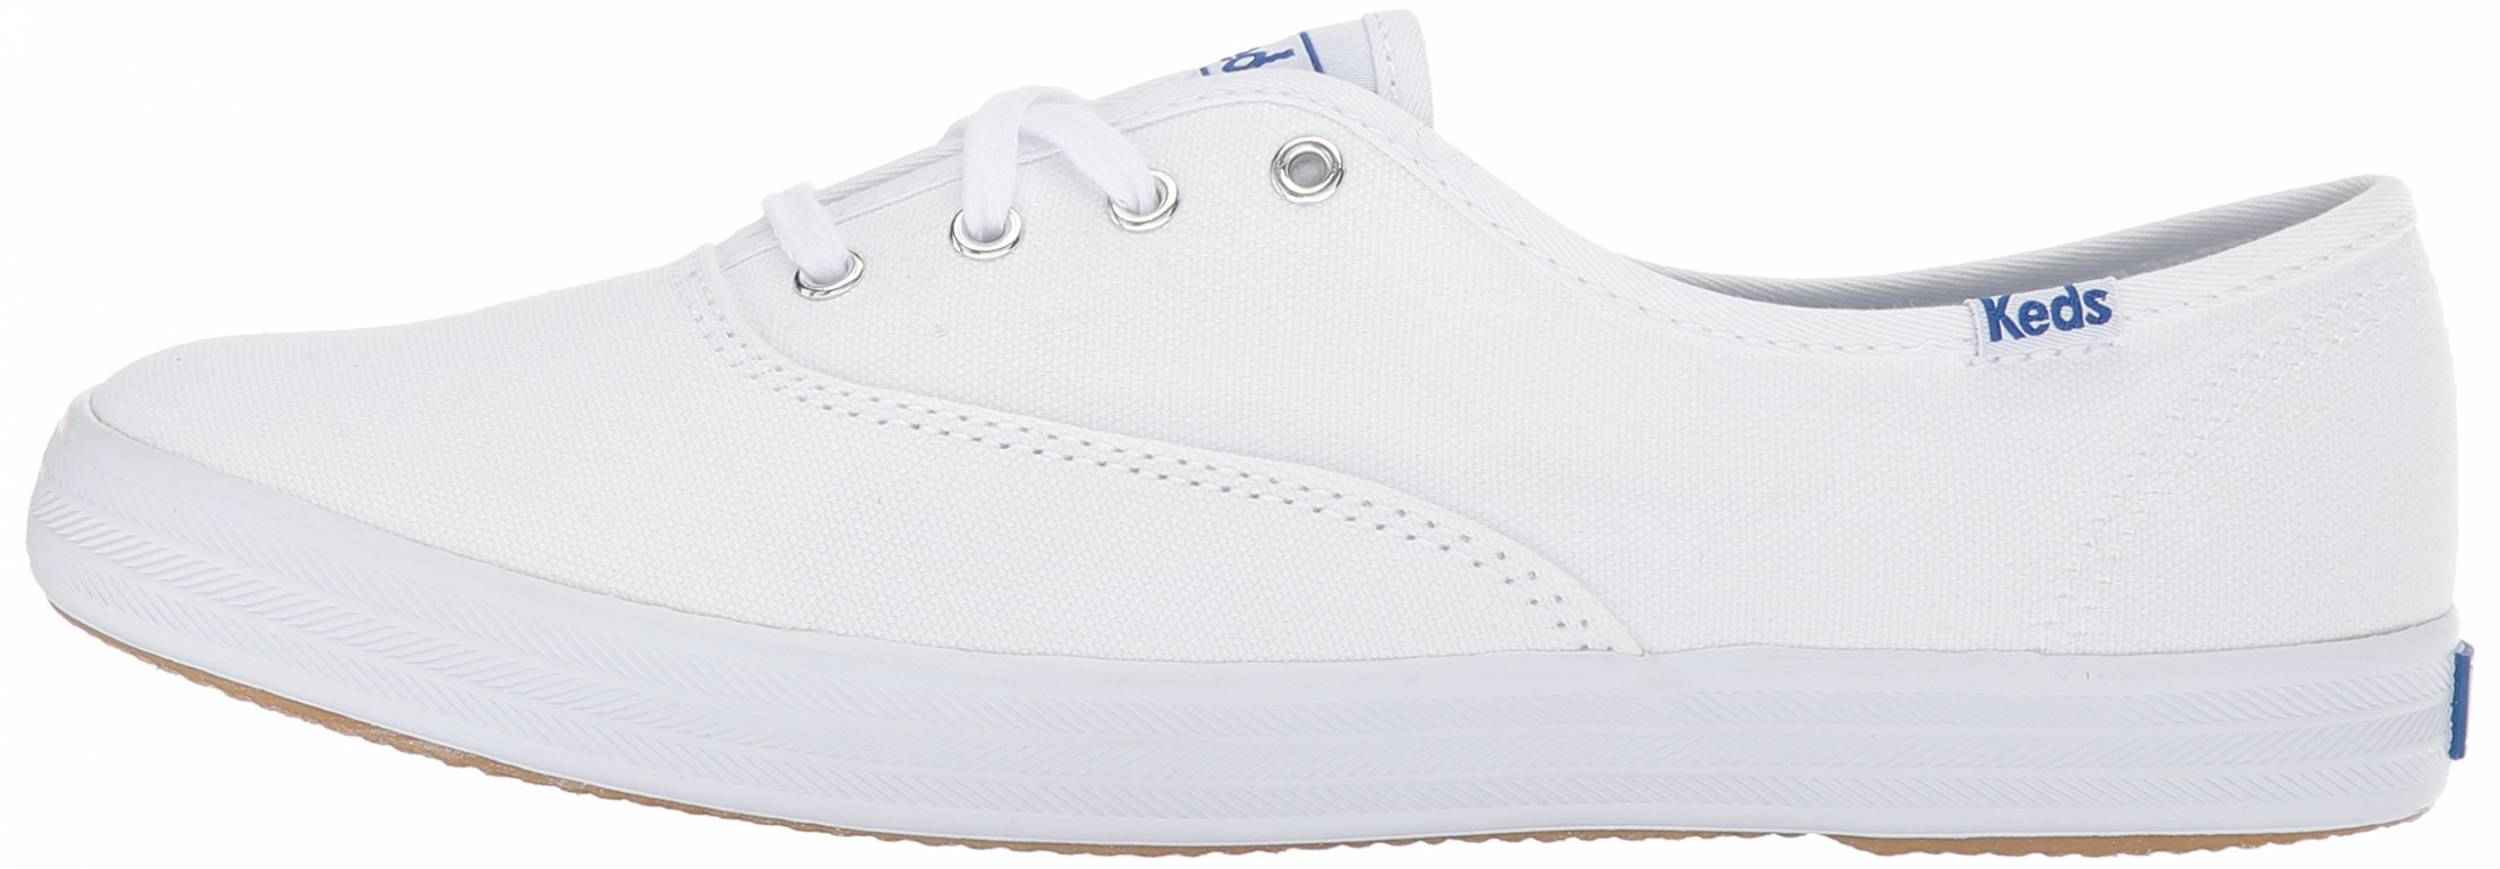 Only $19 + Review of Keds Champion 